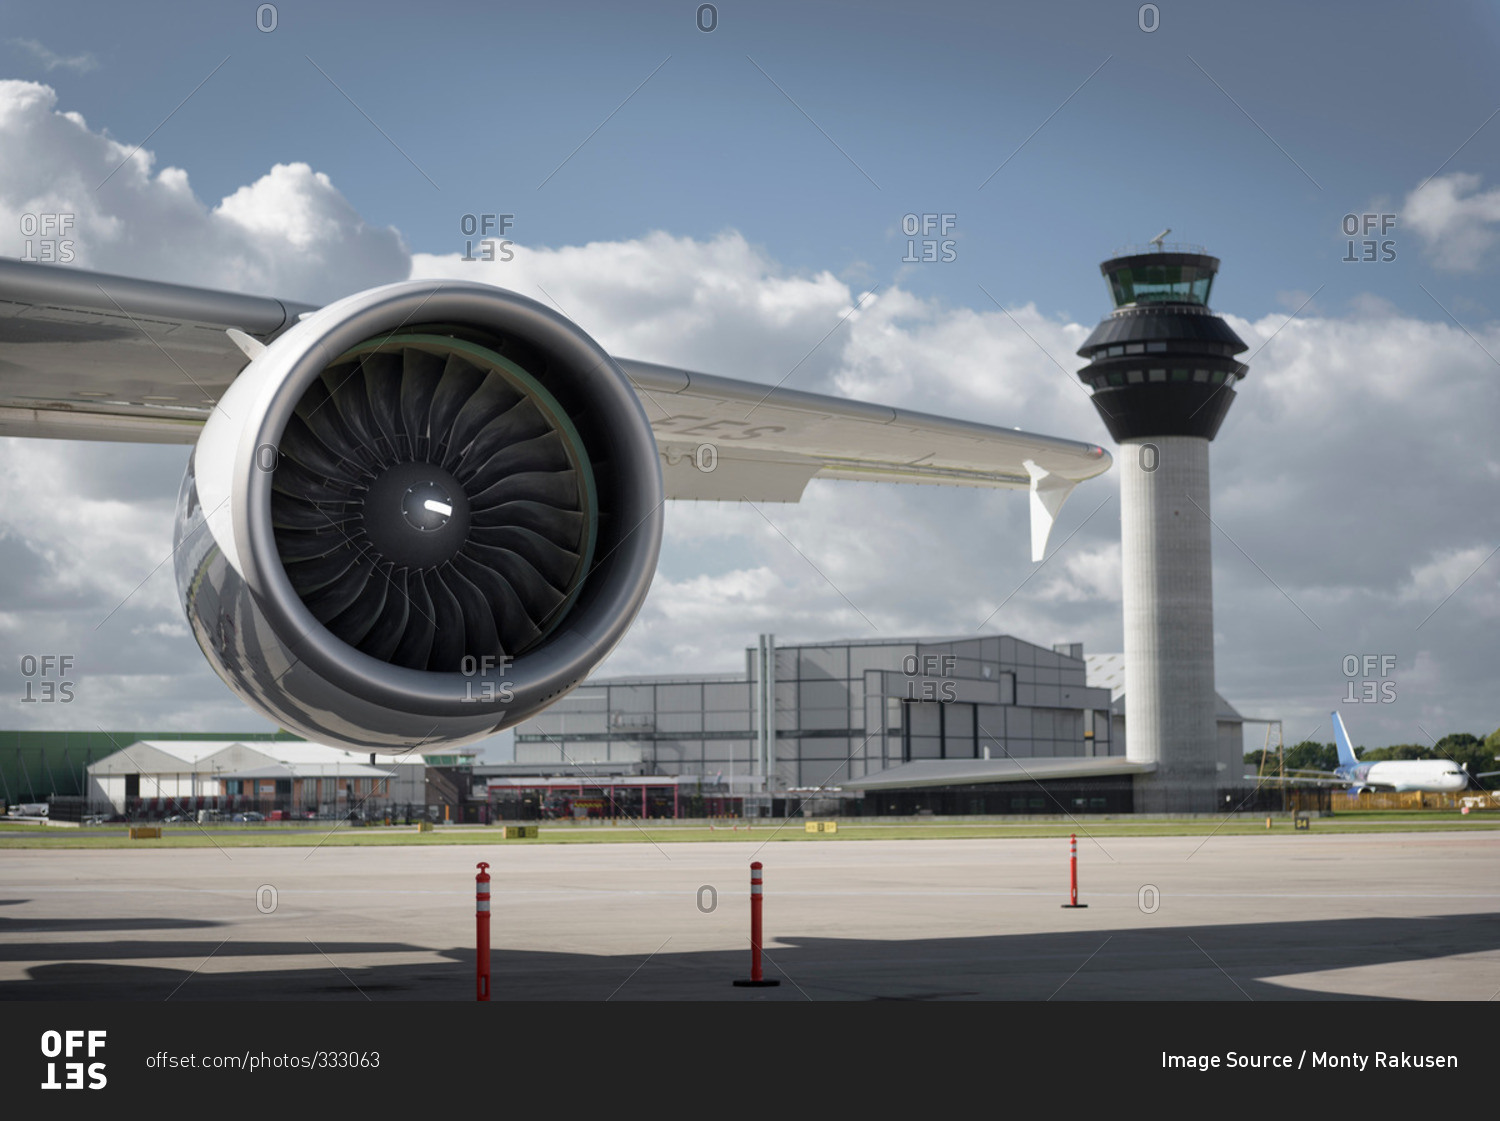 View of an jet engine and control tower at an airport